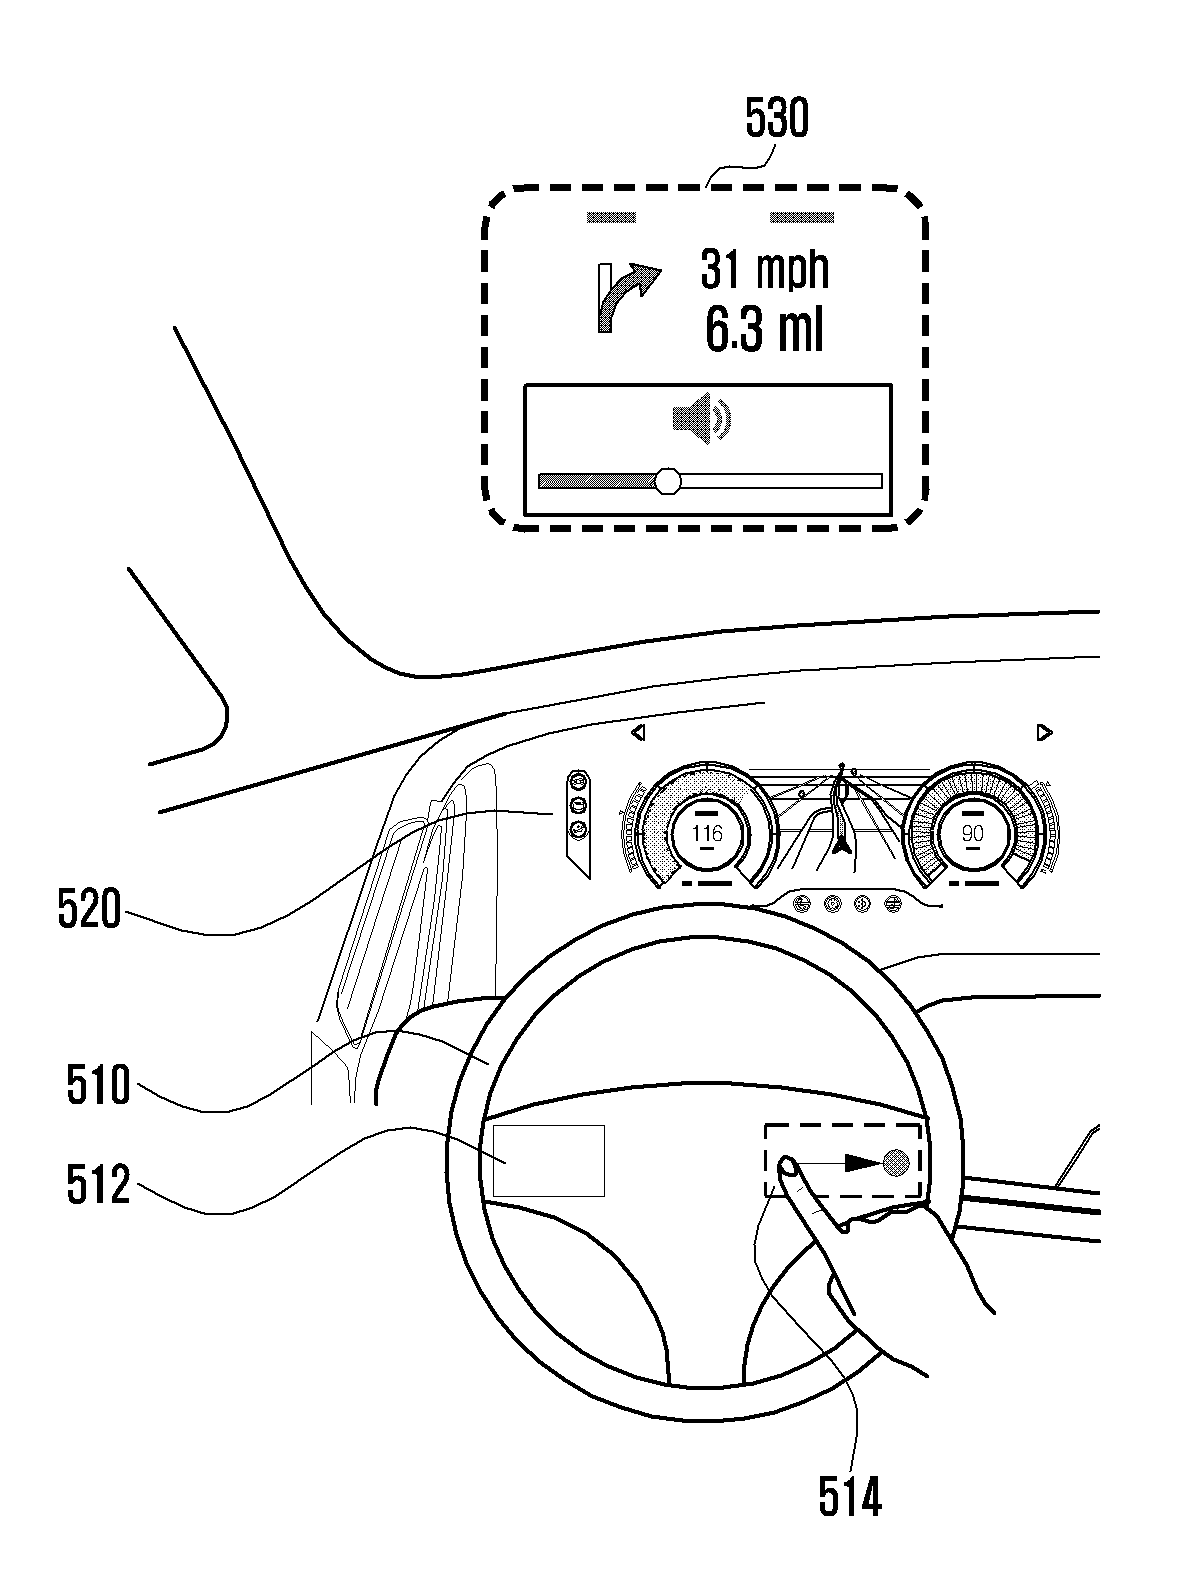 Automotive control system and method for operating the same